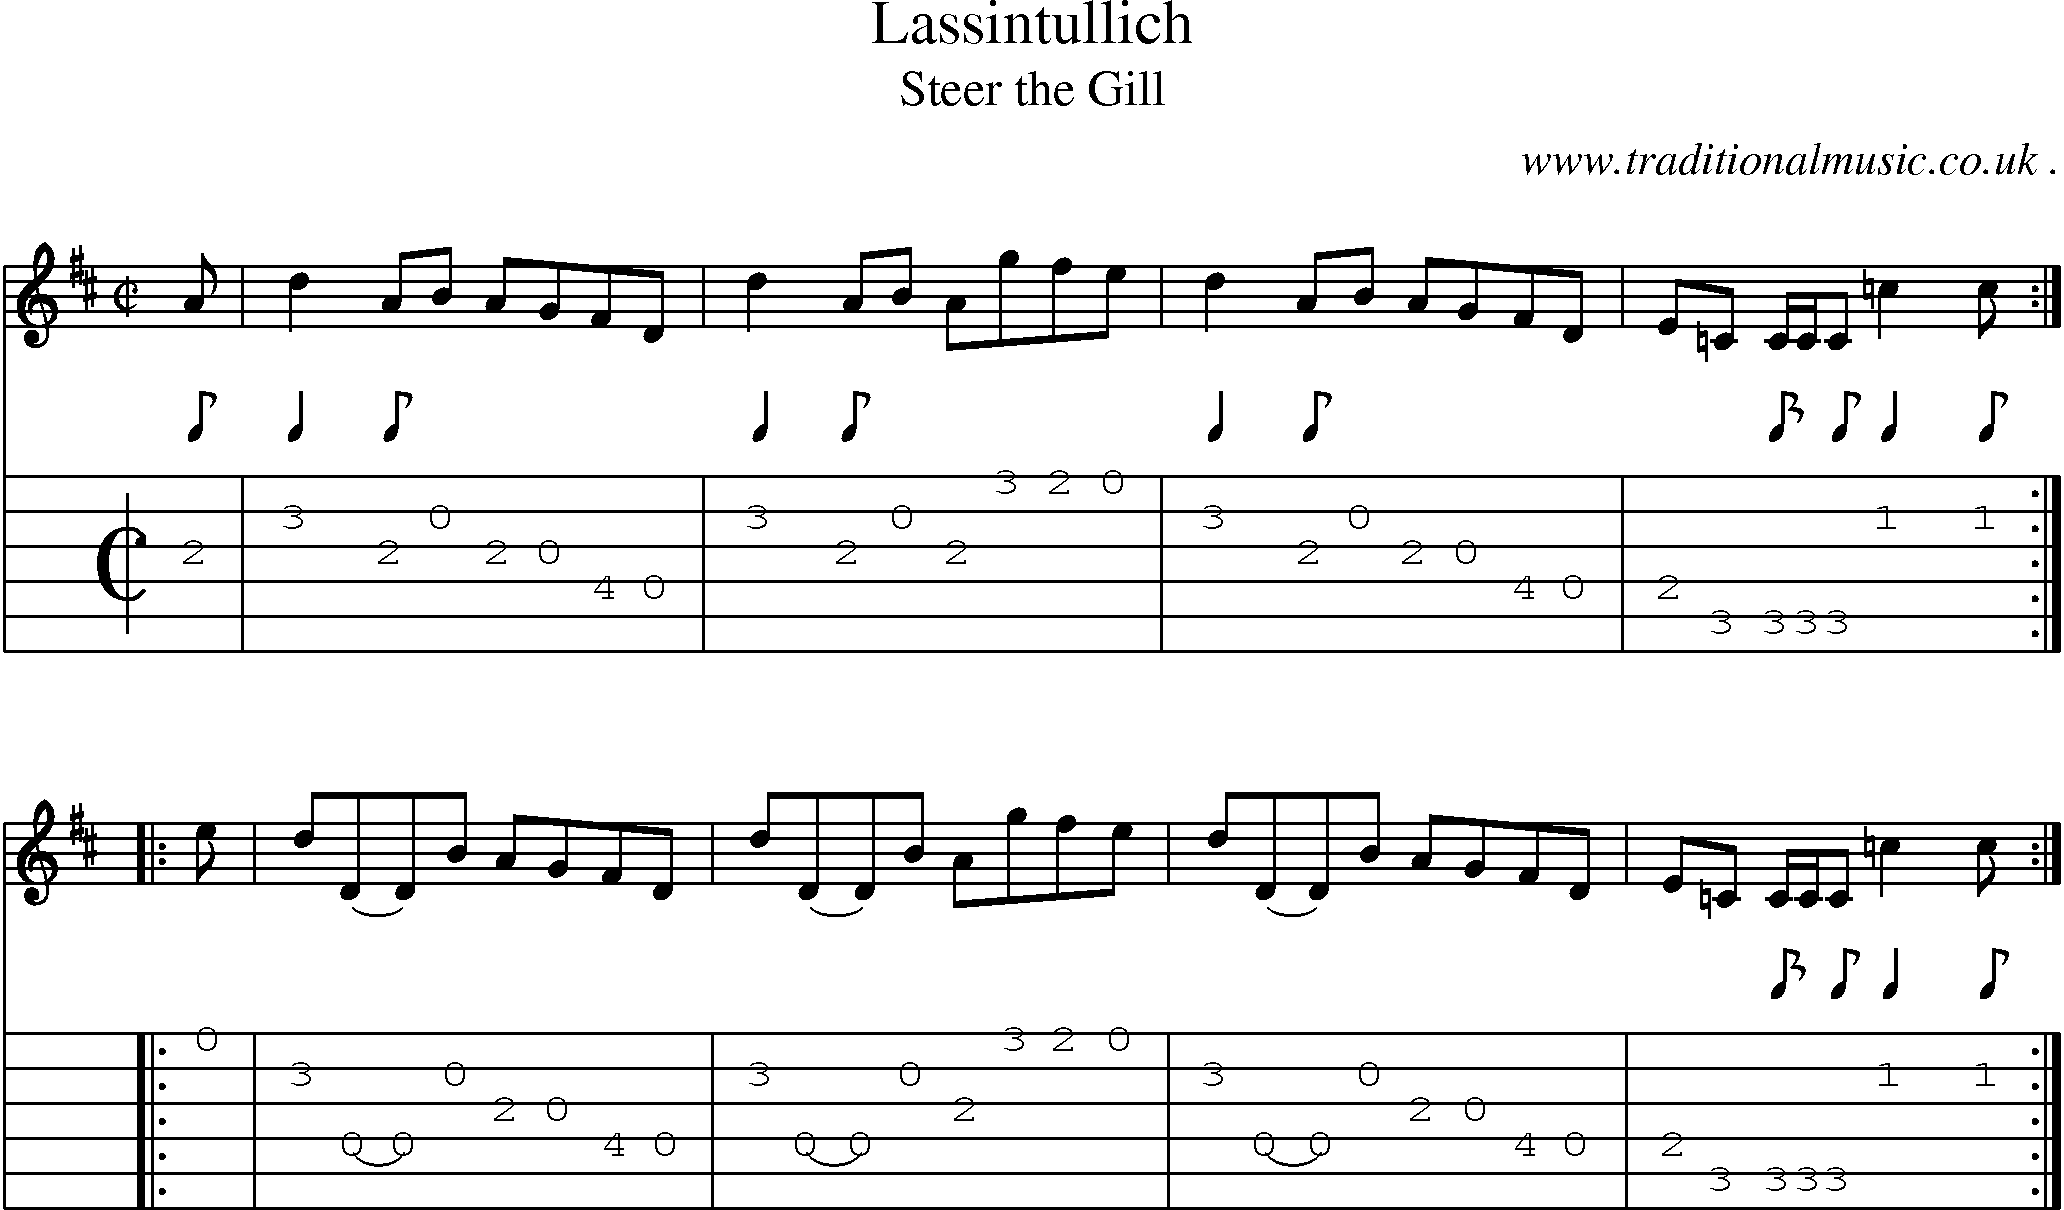 Sheet-music  score, Chords and Guitar Tabs for Lassintullich